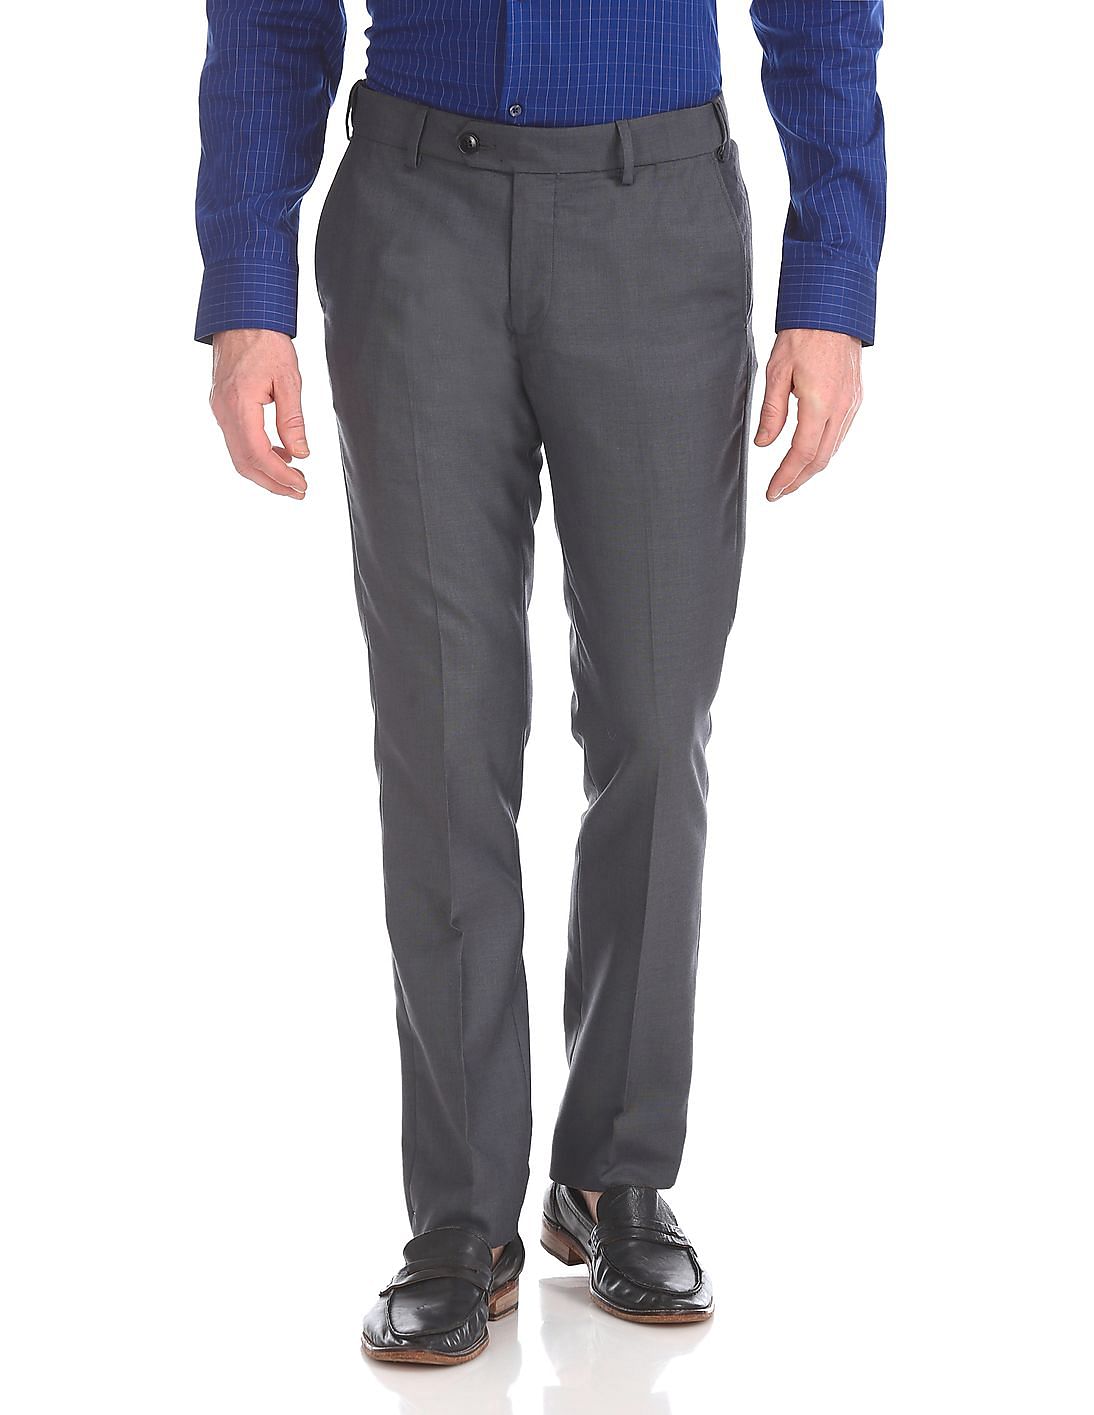 Buy Men Tailored Regular Fit Flat Front Trousers online at NNNOW.com